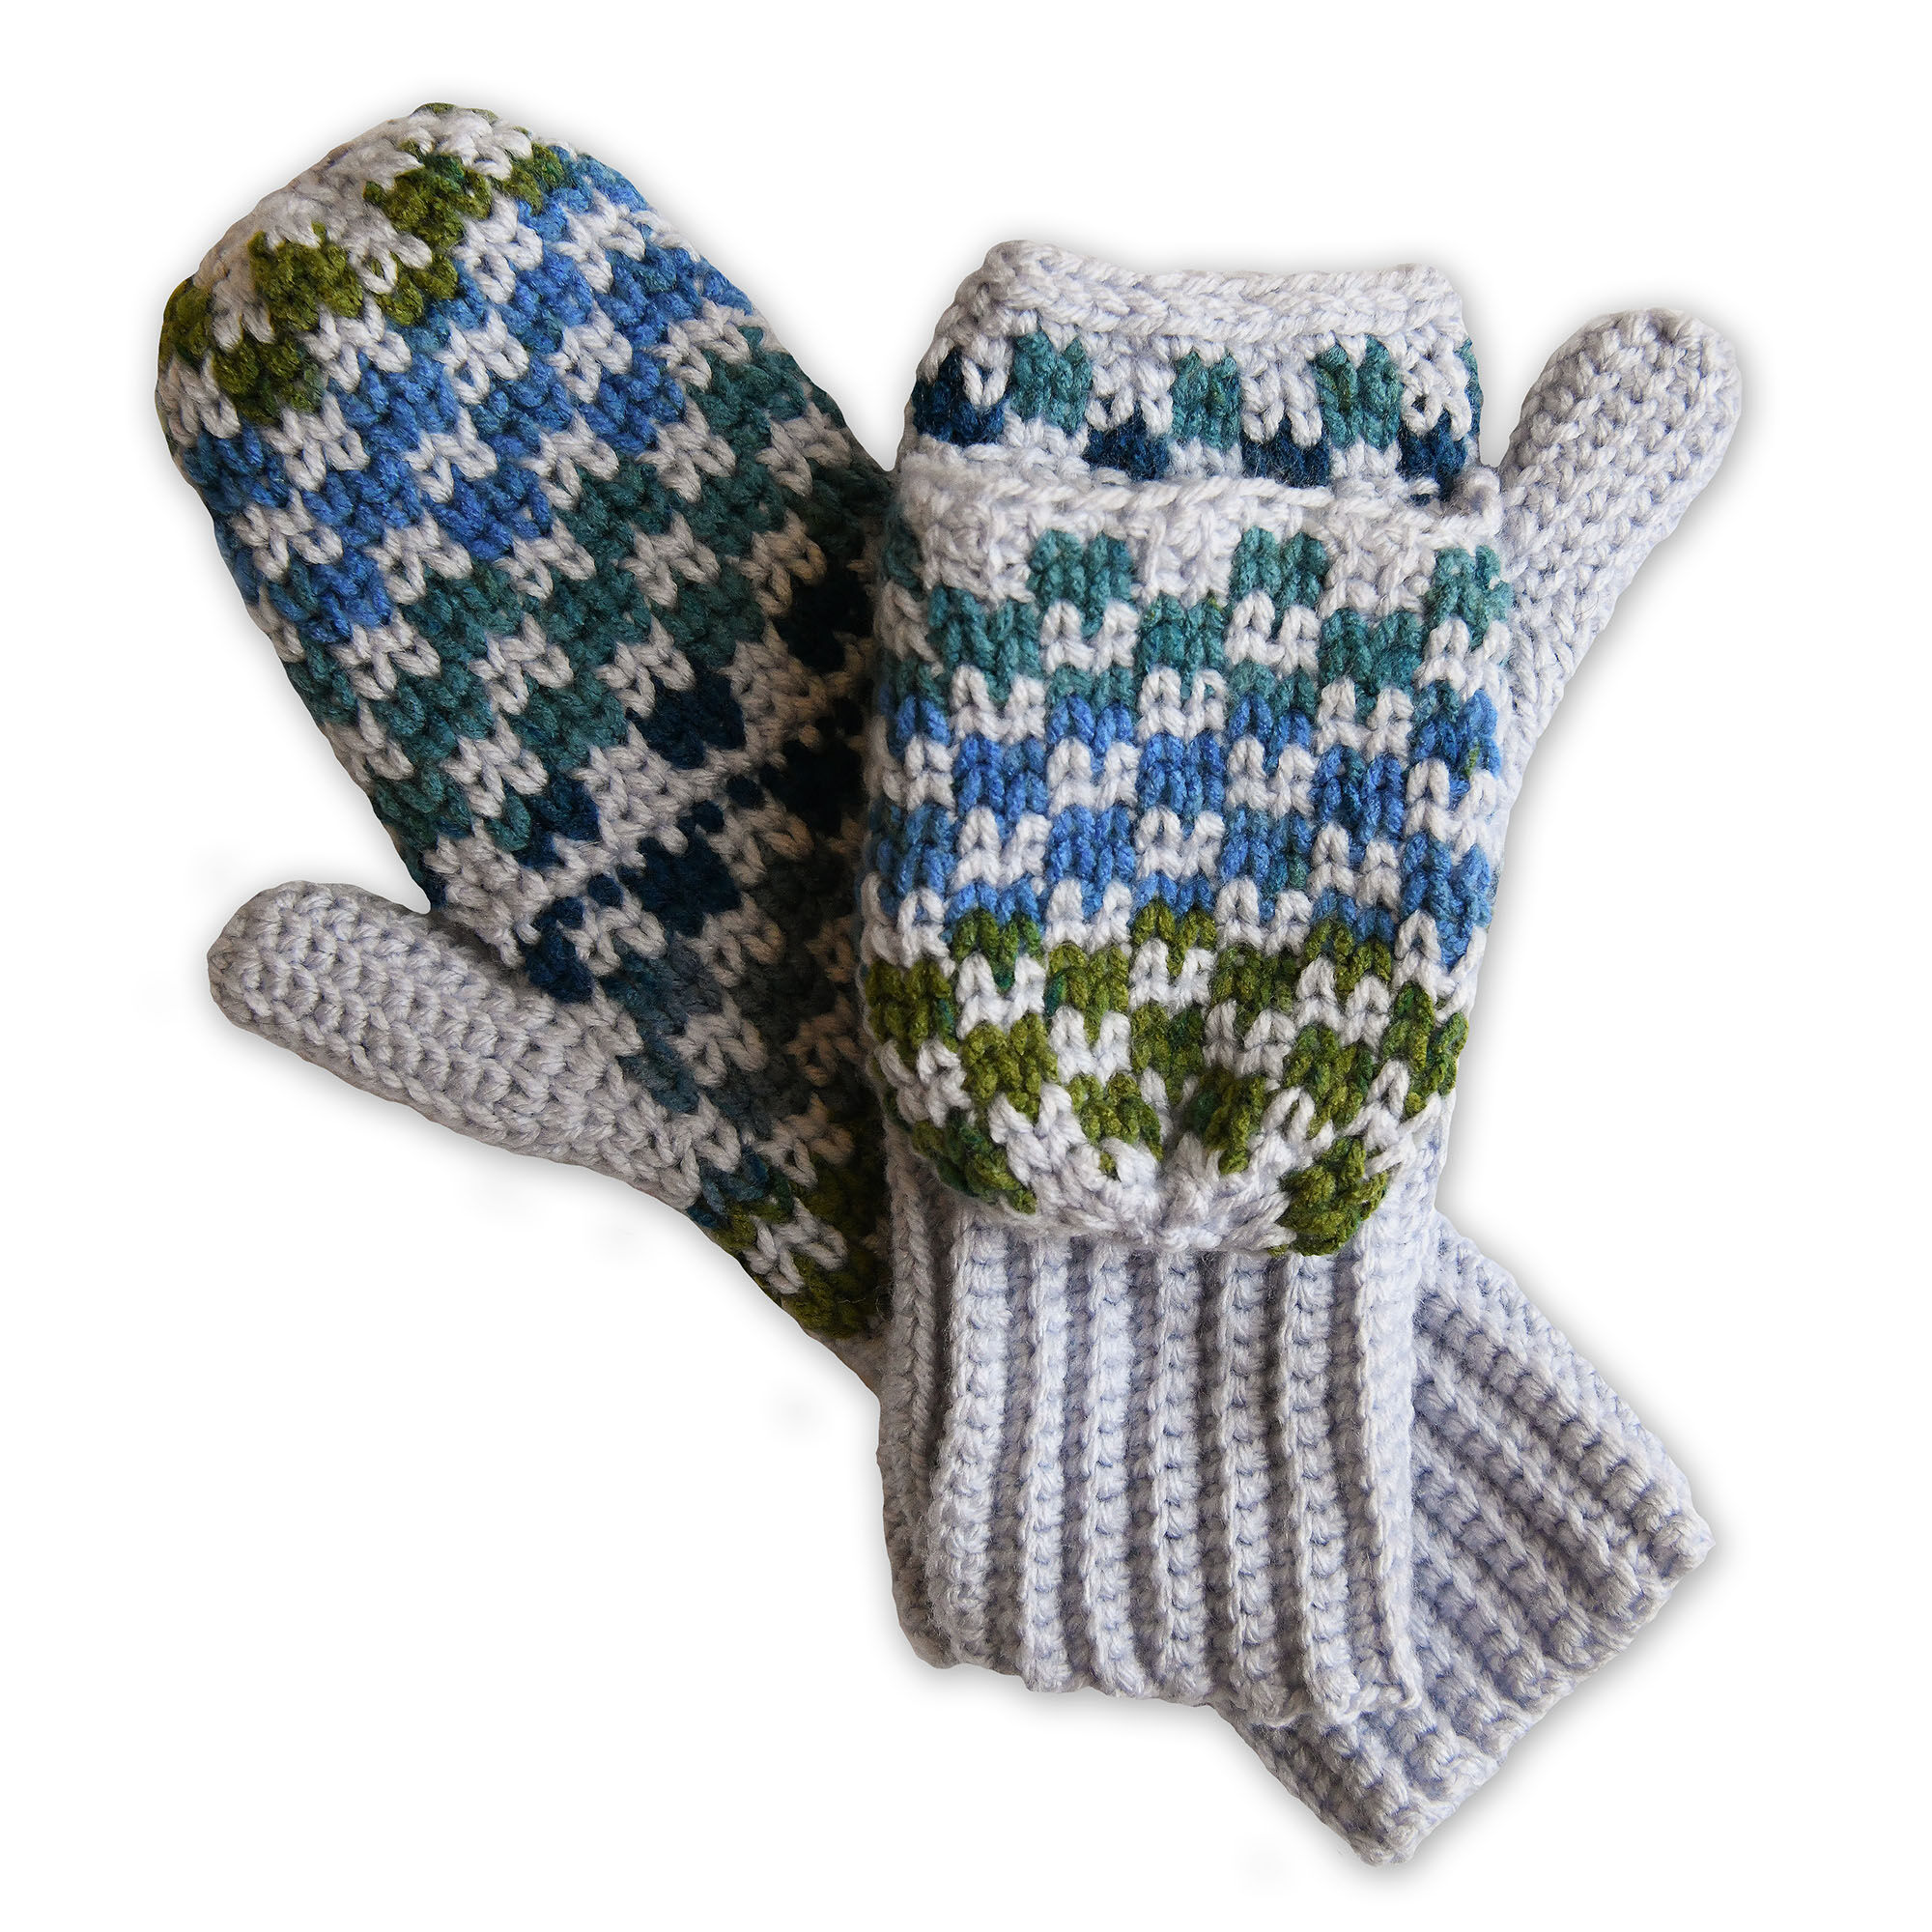 Crochet Patterns Galore - Red Heart 3 in 1 Hand Warmers